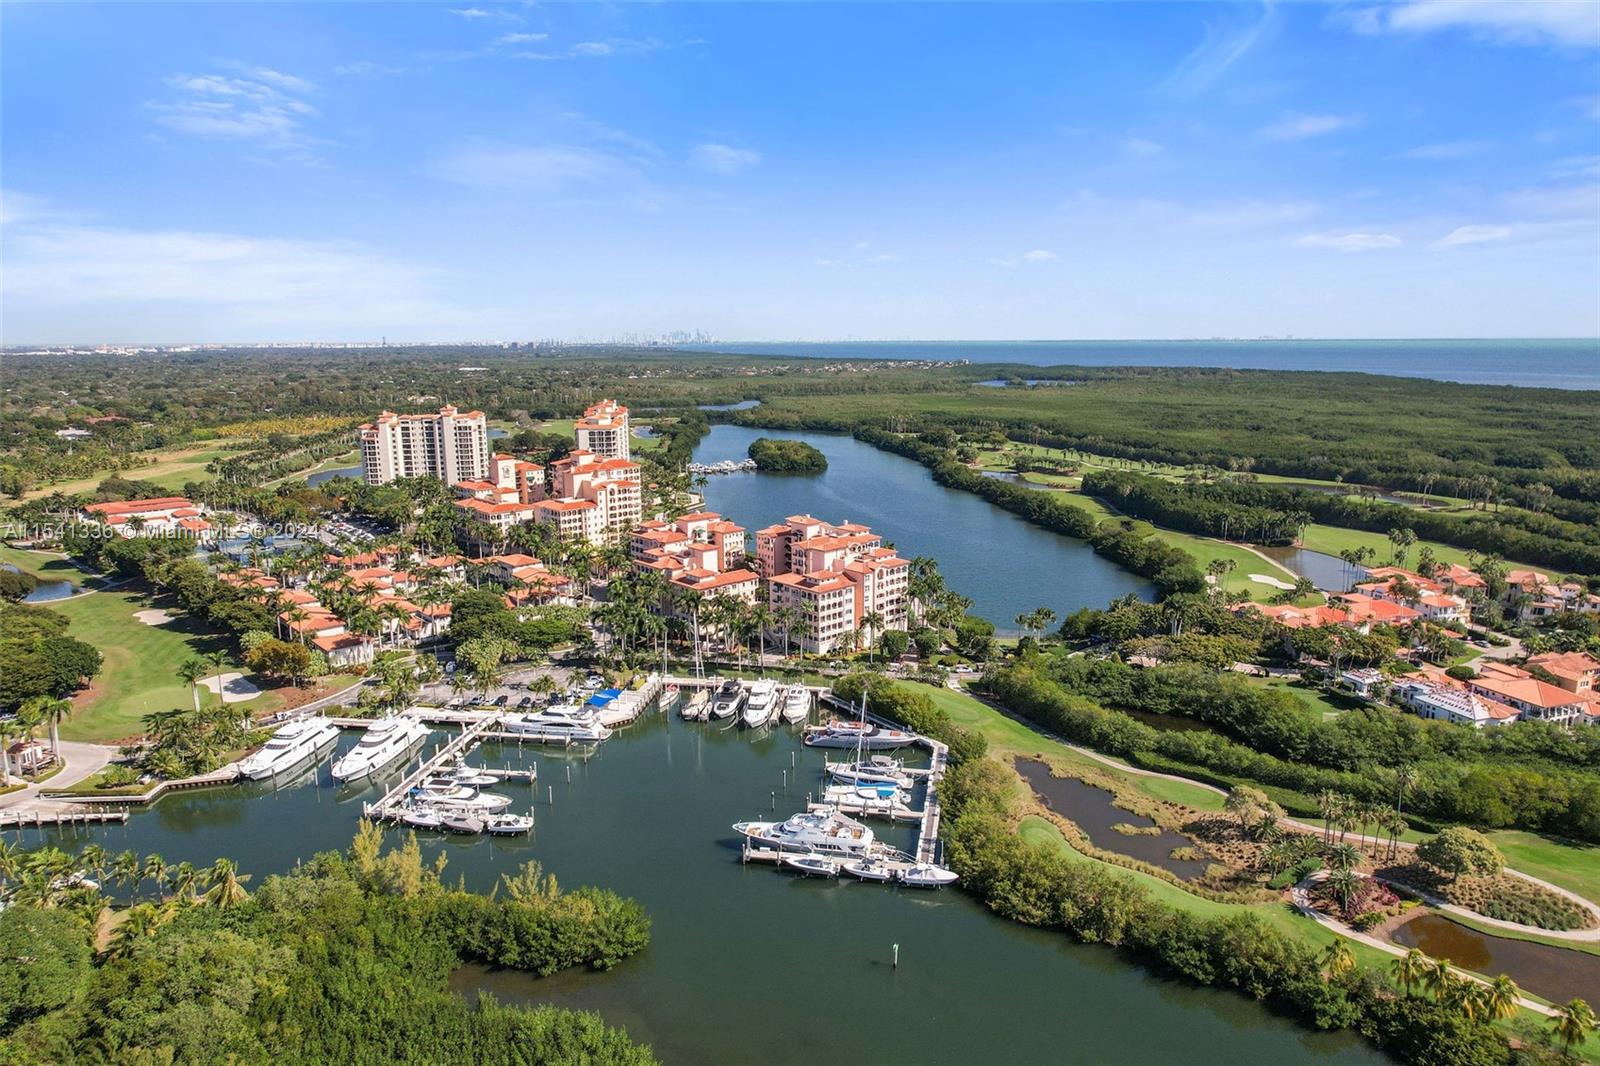 Welcome to this spacious ground-floor corner unit featuring 4 beds, 3.5 baths, plus Office in the guard-gated Coral Gables Community, Deering Bay. Upon entering through the foyer, you'll find an open floor plan connecting to the spacious kitchen with a breakfast nook. The wraparound terrace offers unobstructed views of the lagoon, providing a serene retreat. The Primary Suite has a private balcony, walk-in closet, and spa-inspired bath, ensuring residents enjoy a tranquil sanctuary. Amenities include a gym, pool, and 2 parking spaces. With the Marina, Clubhouse, and prizewinning Golf Course just steps away, residents have easy access to recreational facilities. Club Membership is available to enhance the resort-style living experience, adding a touch of luxury to this exceptional property.